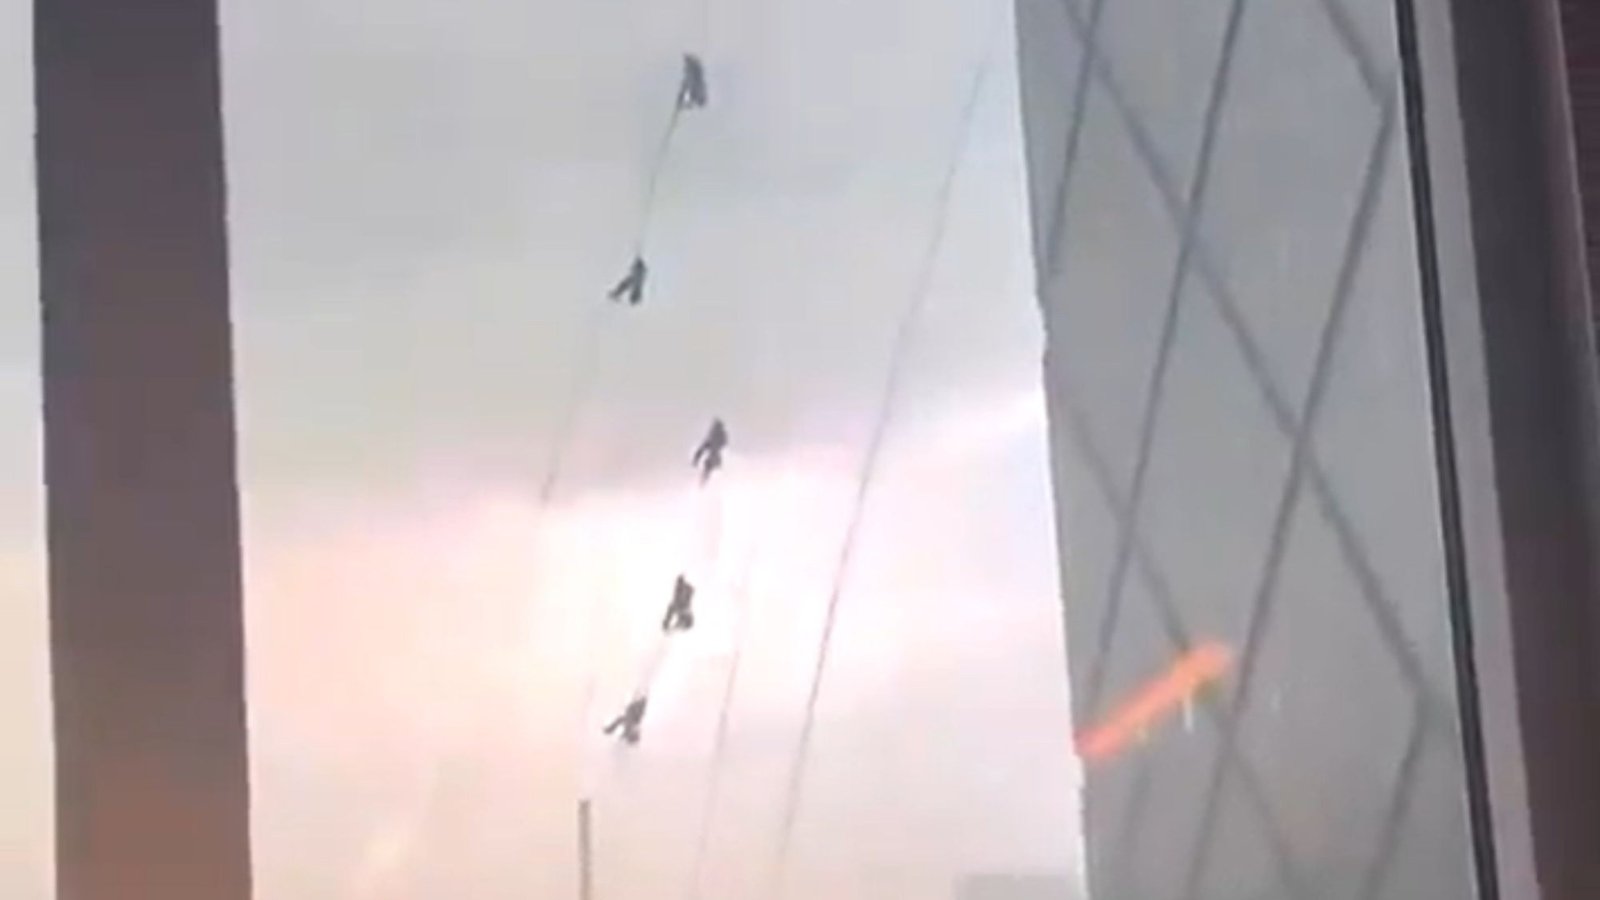 Terrifying moment window cleaners cling on for their lives swinging from 51-storey building as they’re battered by storm